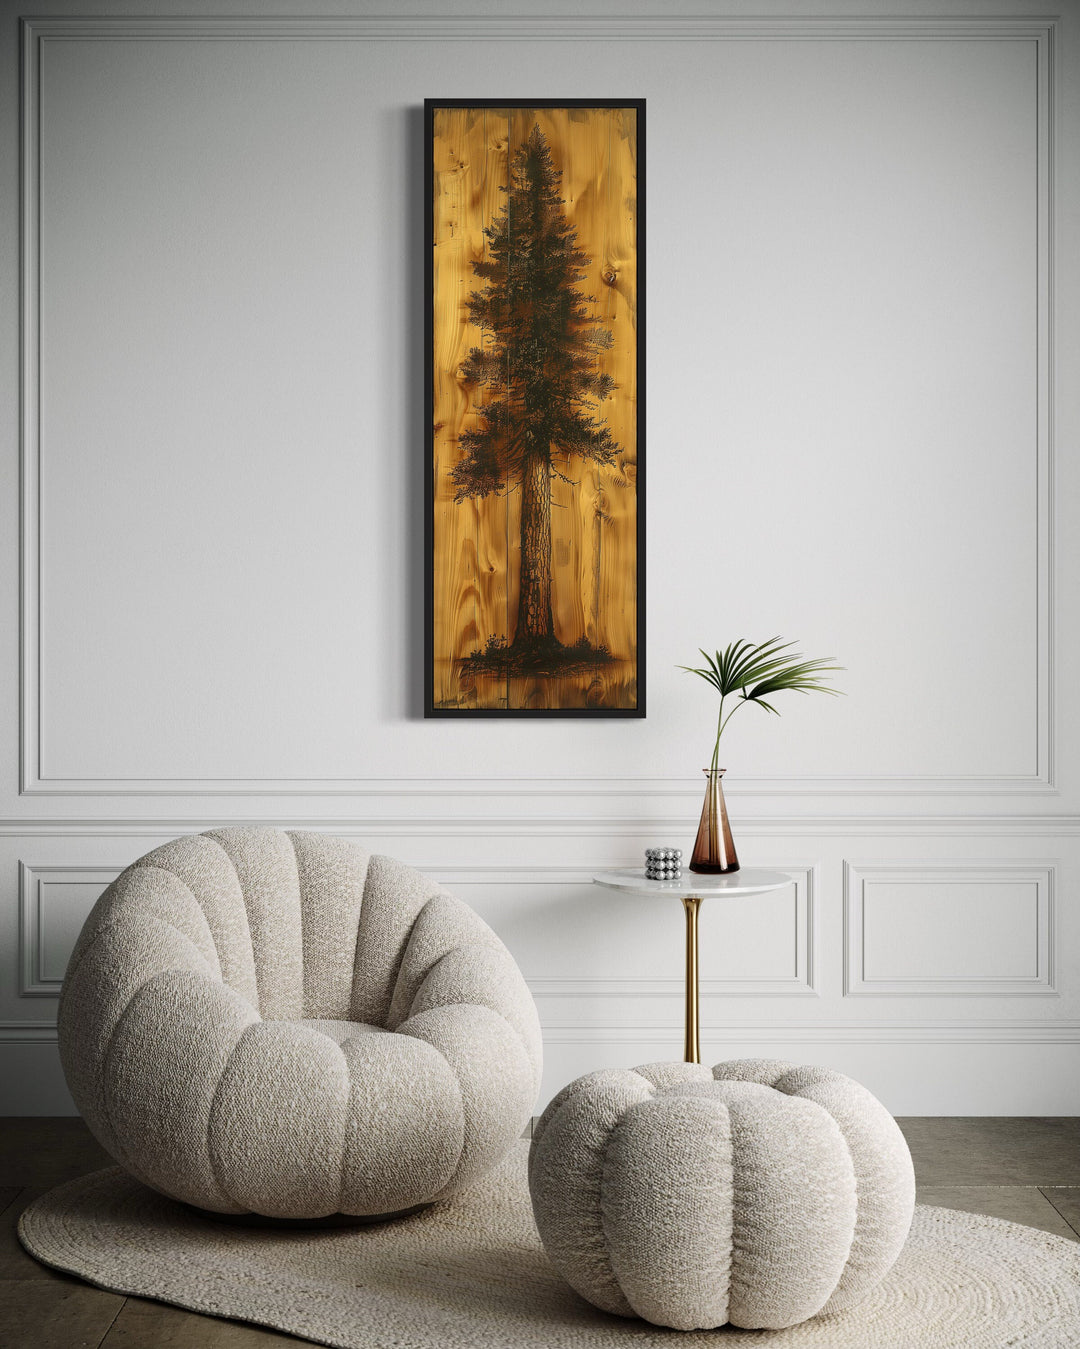 Tall Narrow Pine Tree Painted On Wood Slice Cabin Vertical Decor in rustic room